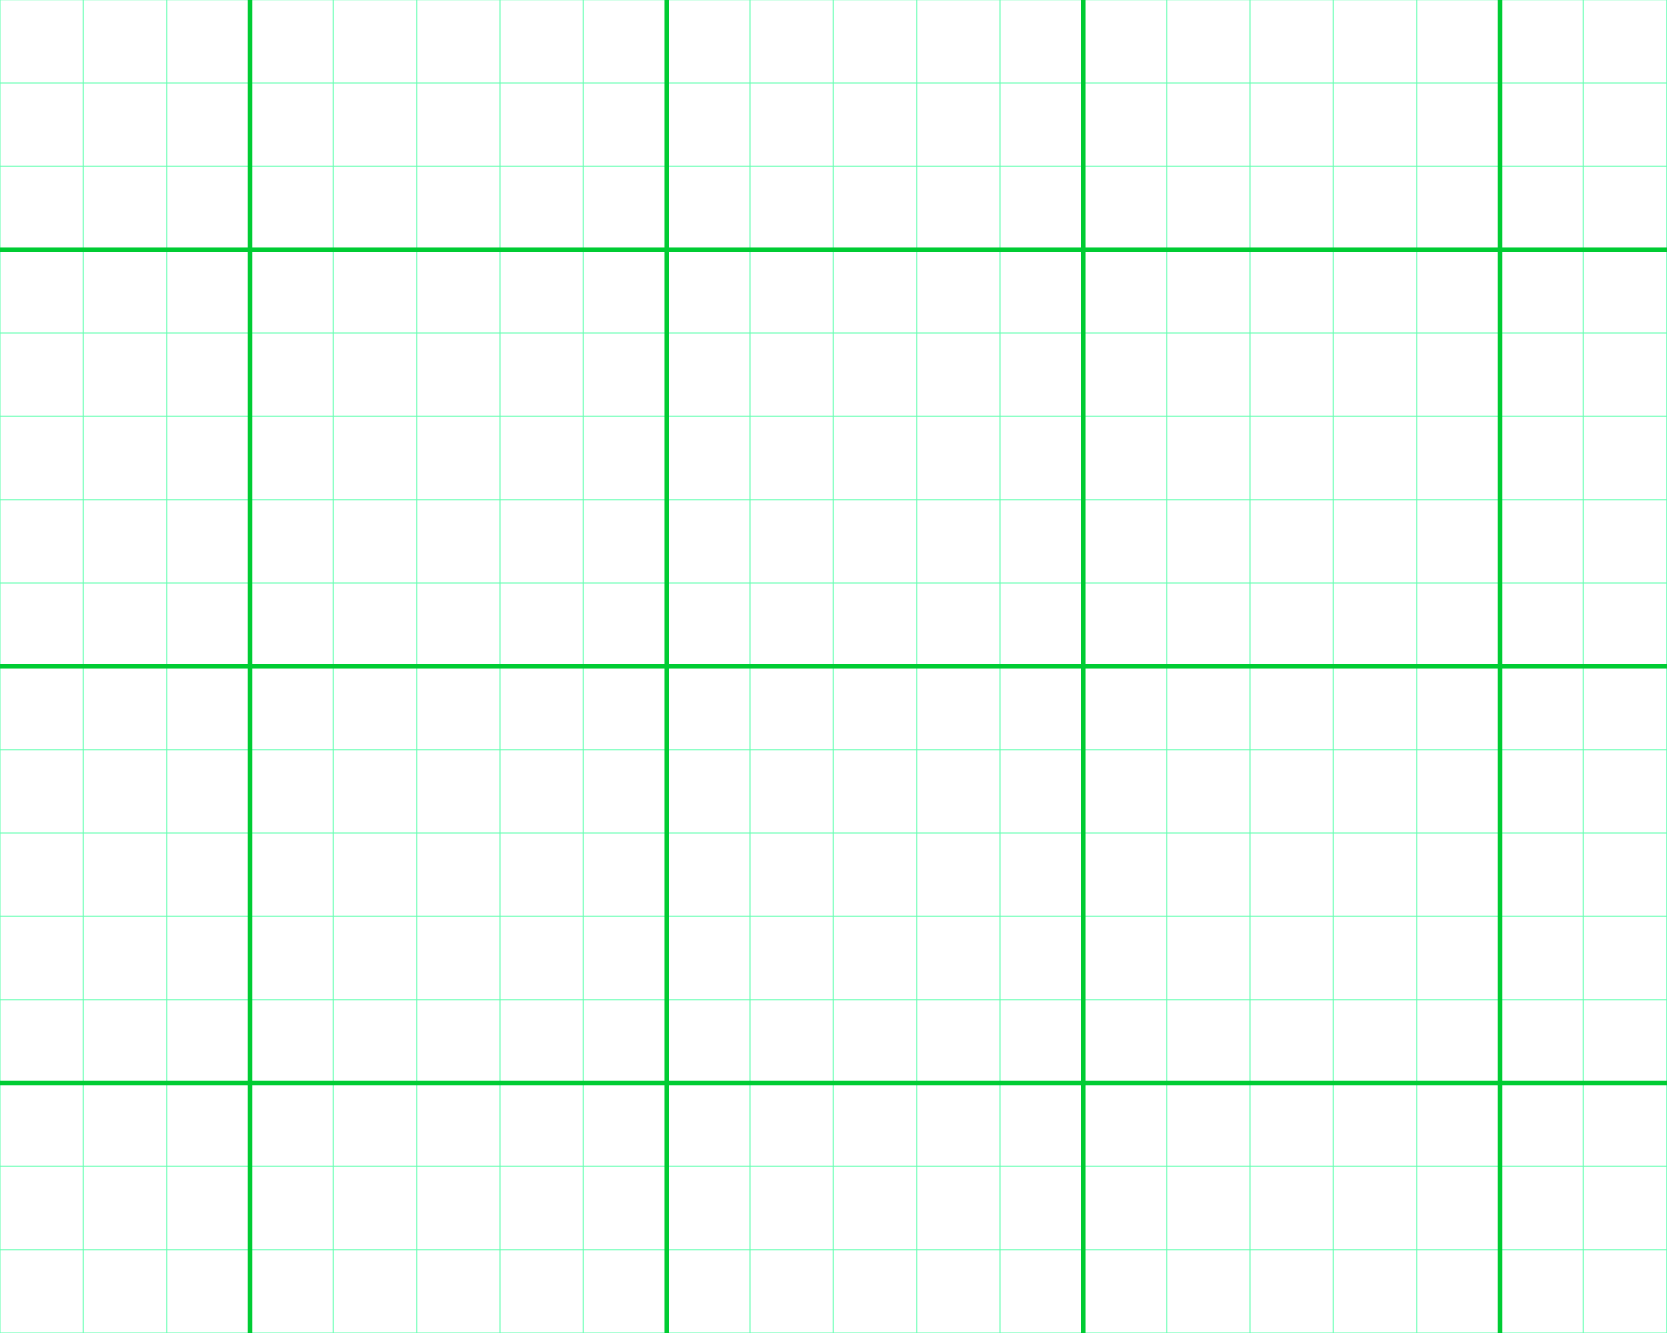 gridsample.png